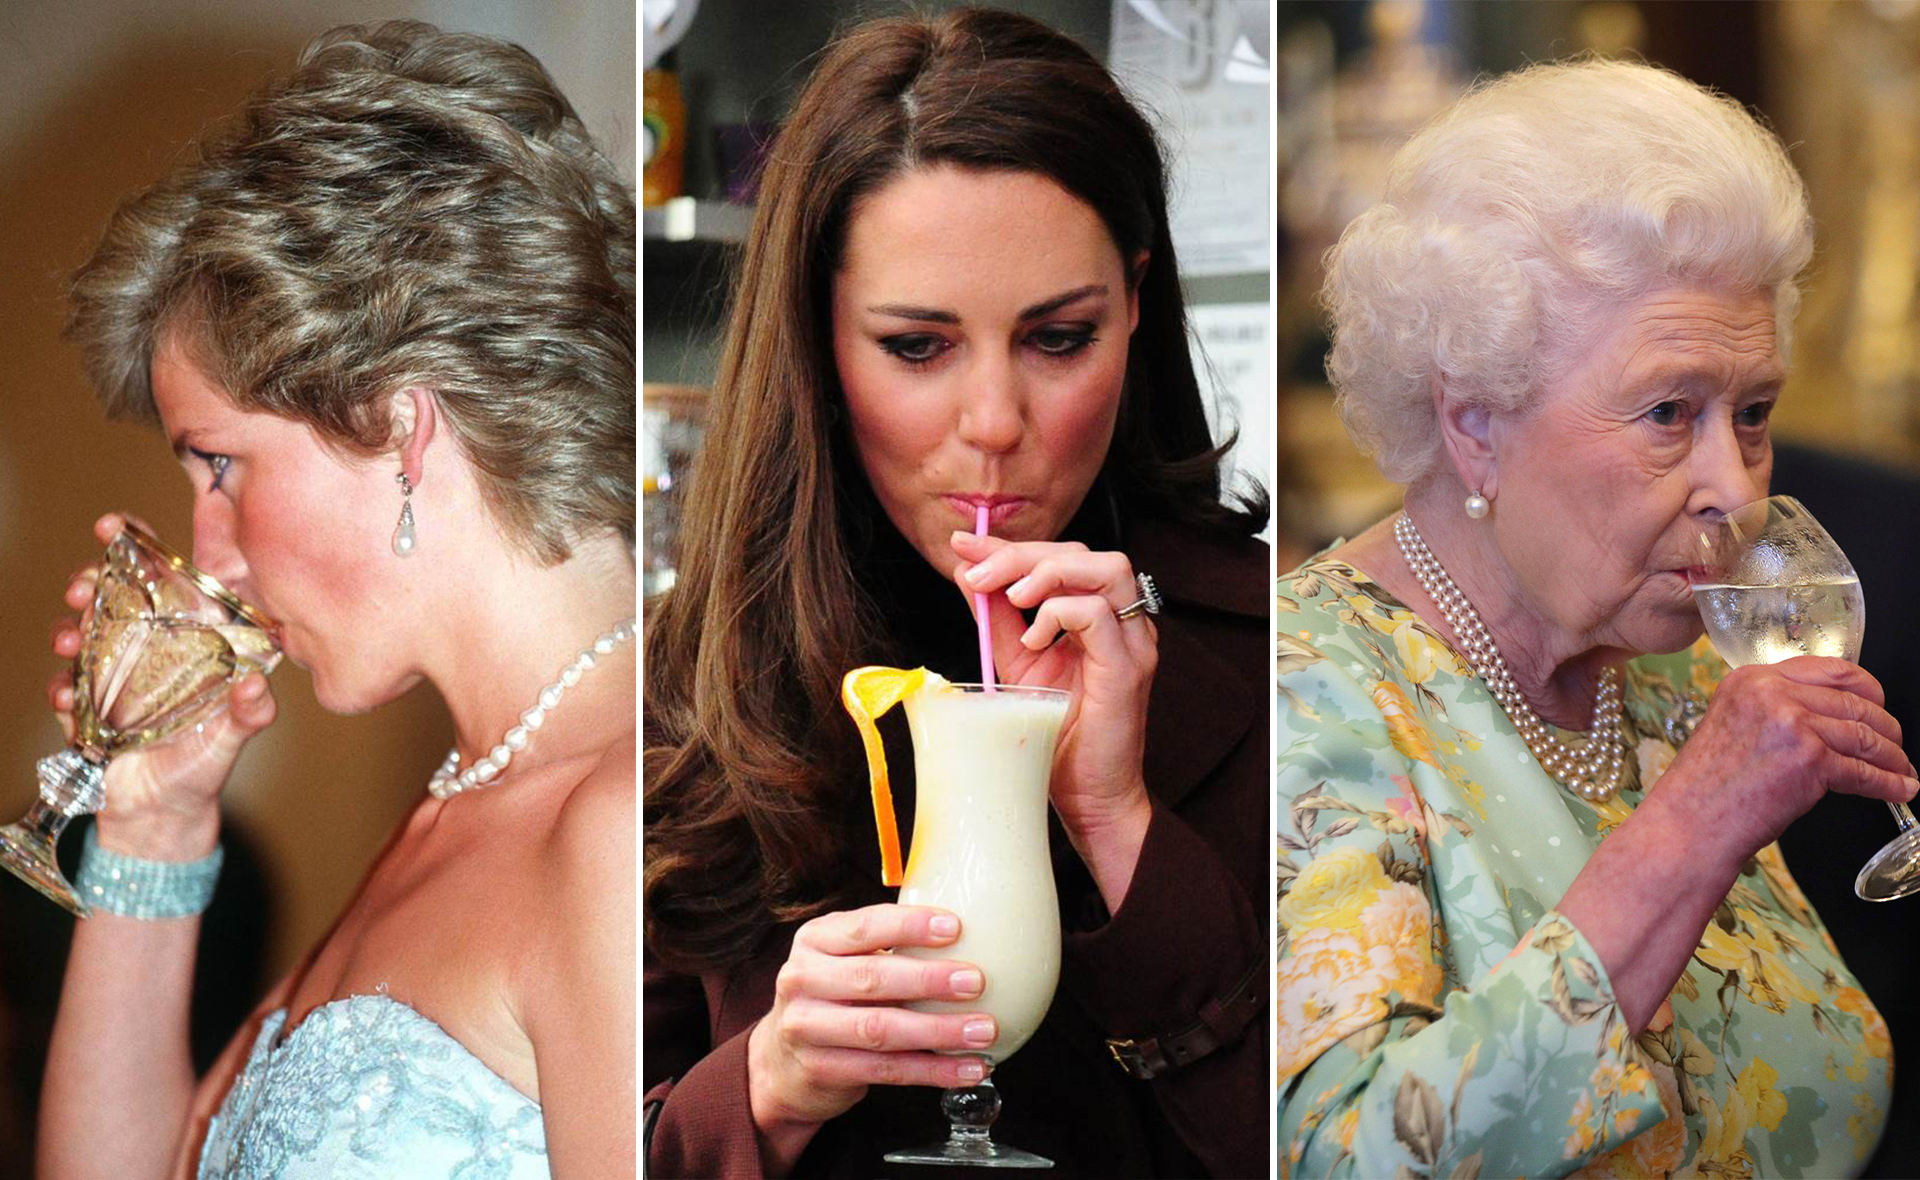 Another drink, sir and ma’am? These photos prove the royals enjoy a pint or a glass of bubbles just as much as the rest of us